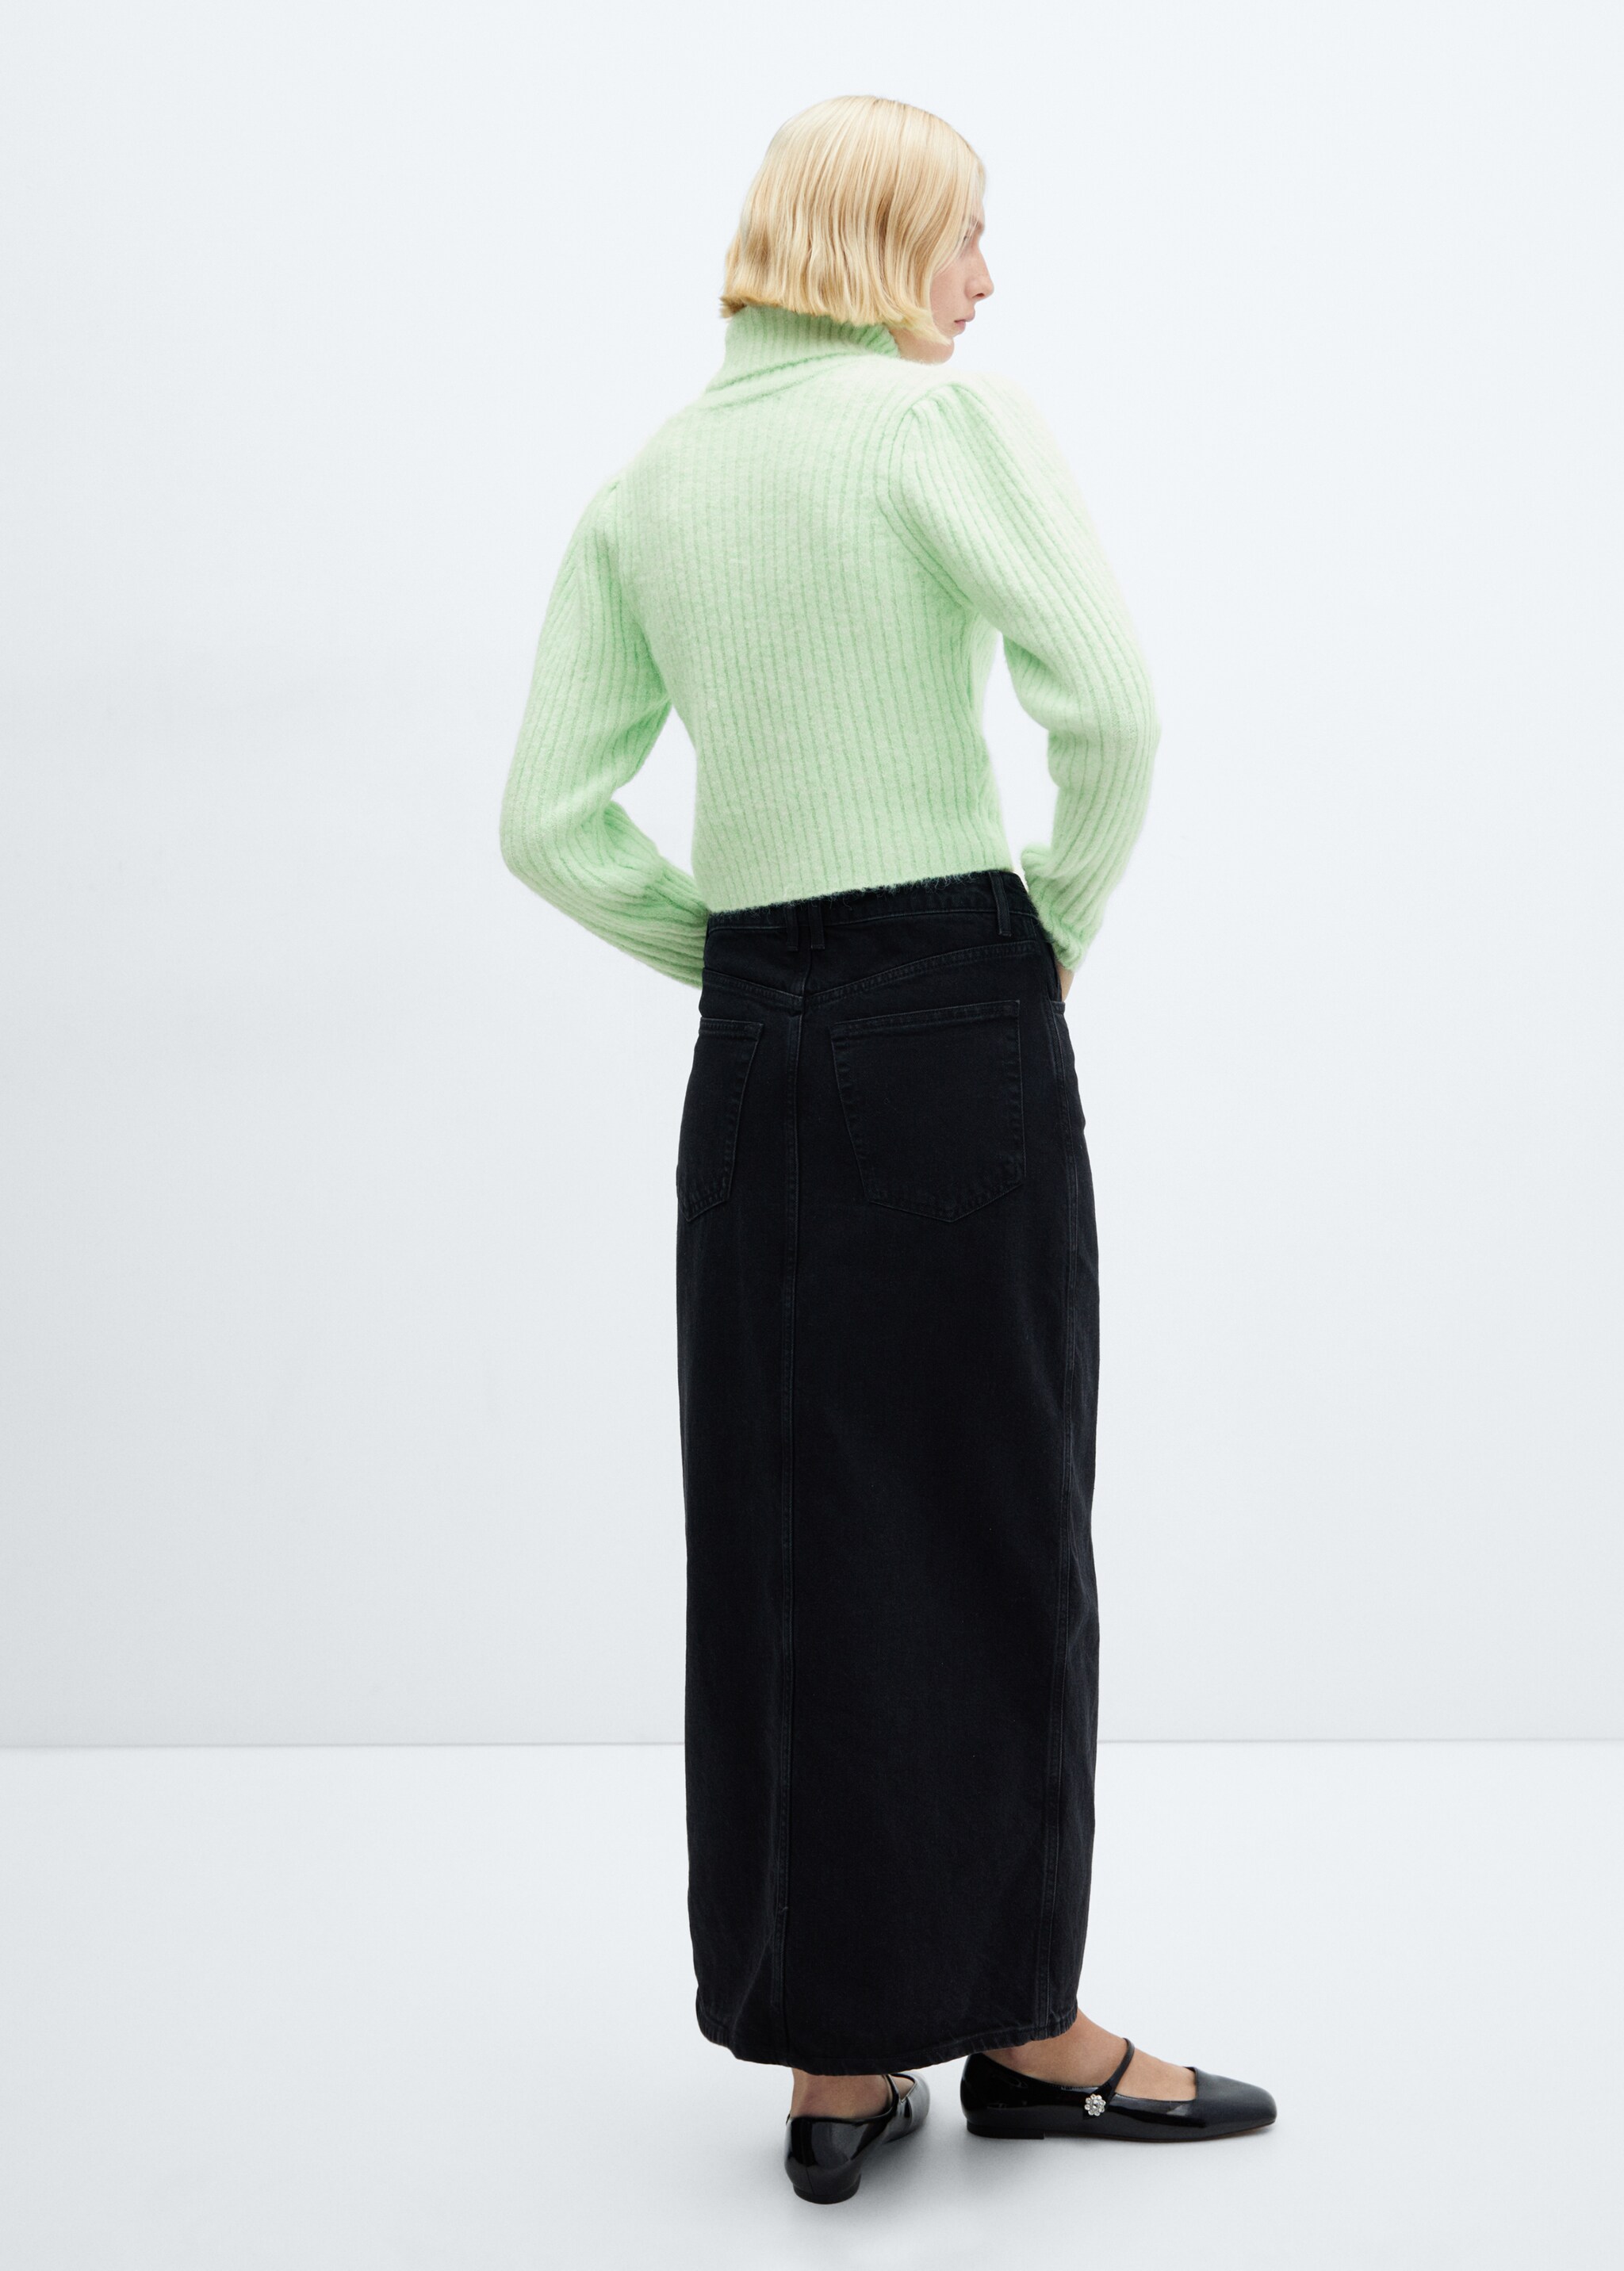 Turtleneck knitted sweater - Reverse of the article